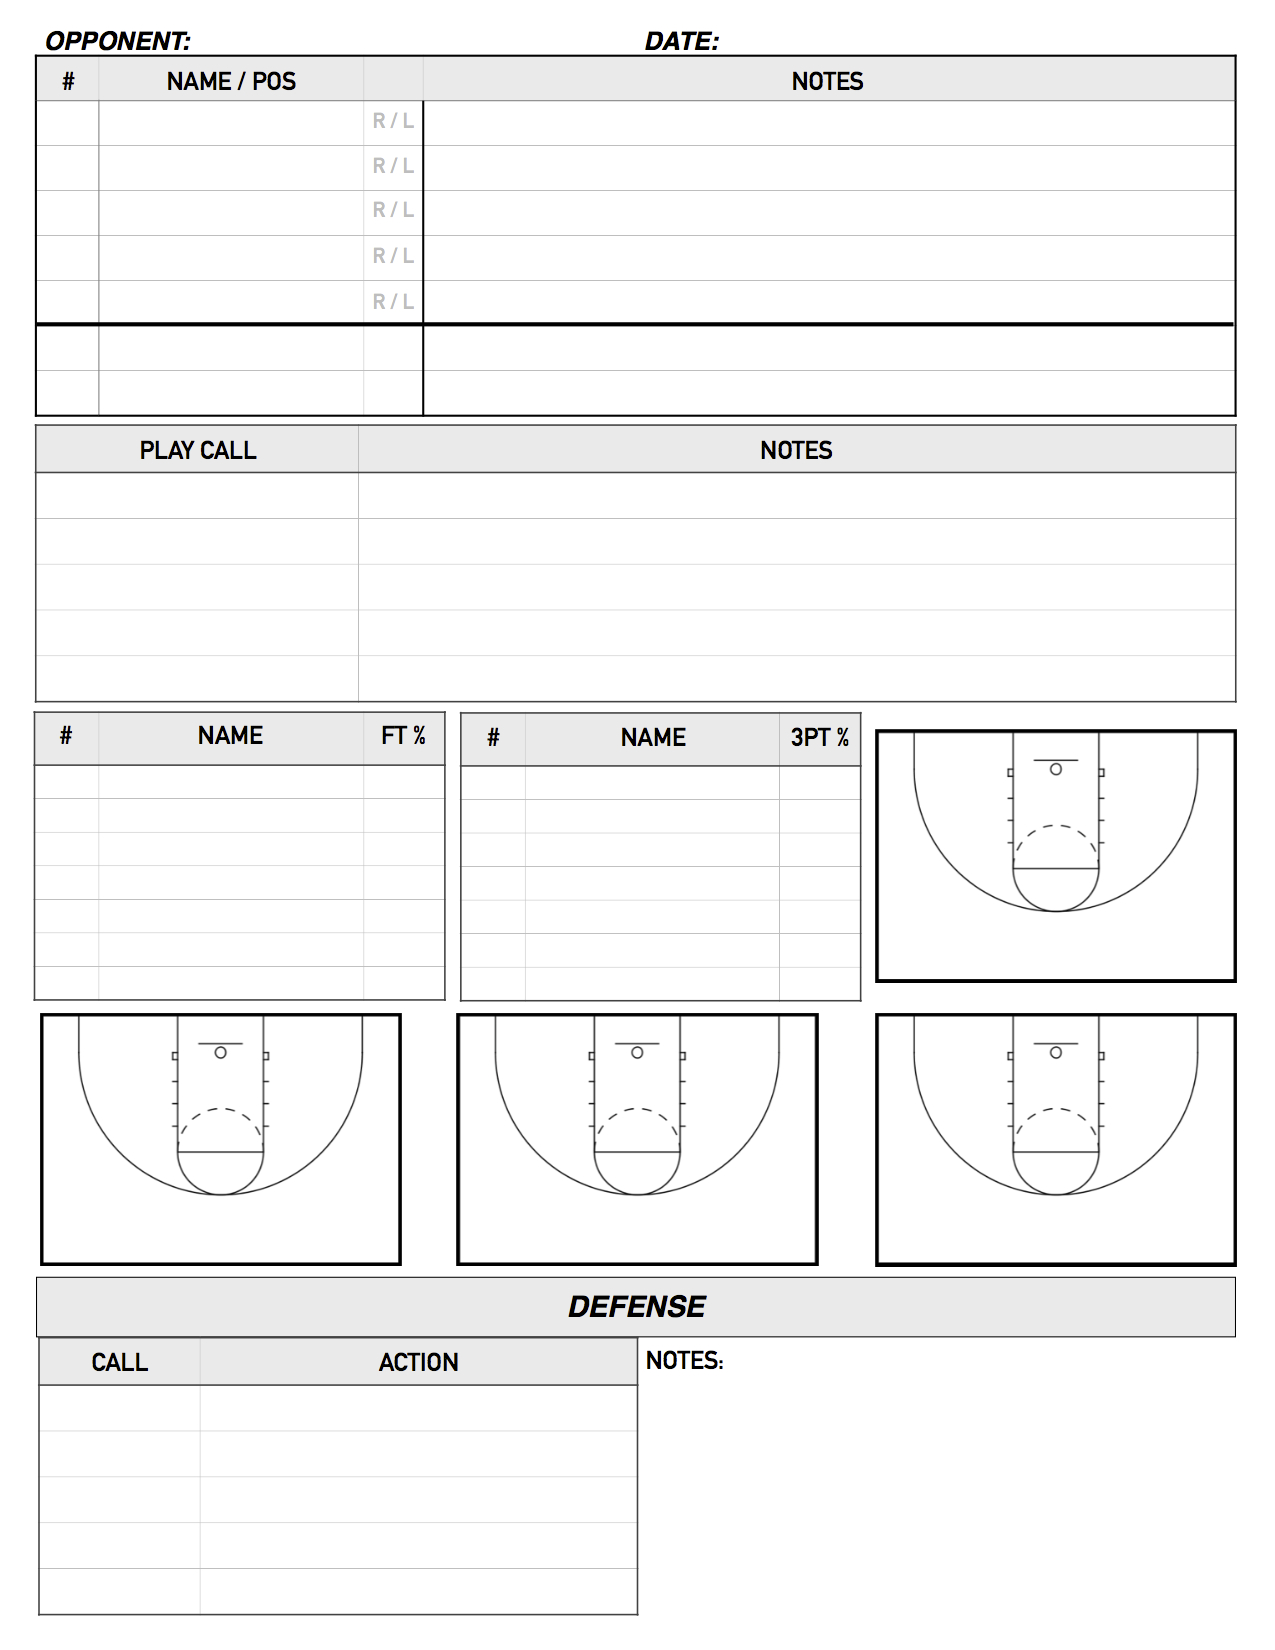 Scouting From The Bench | College Basketball, Basketball Within Basketball Scouting Report Template